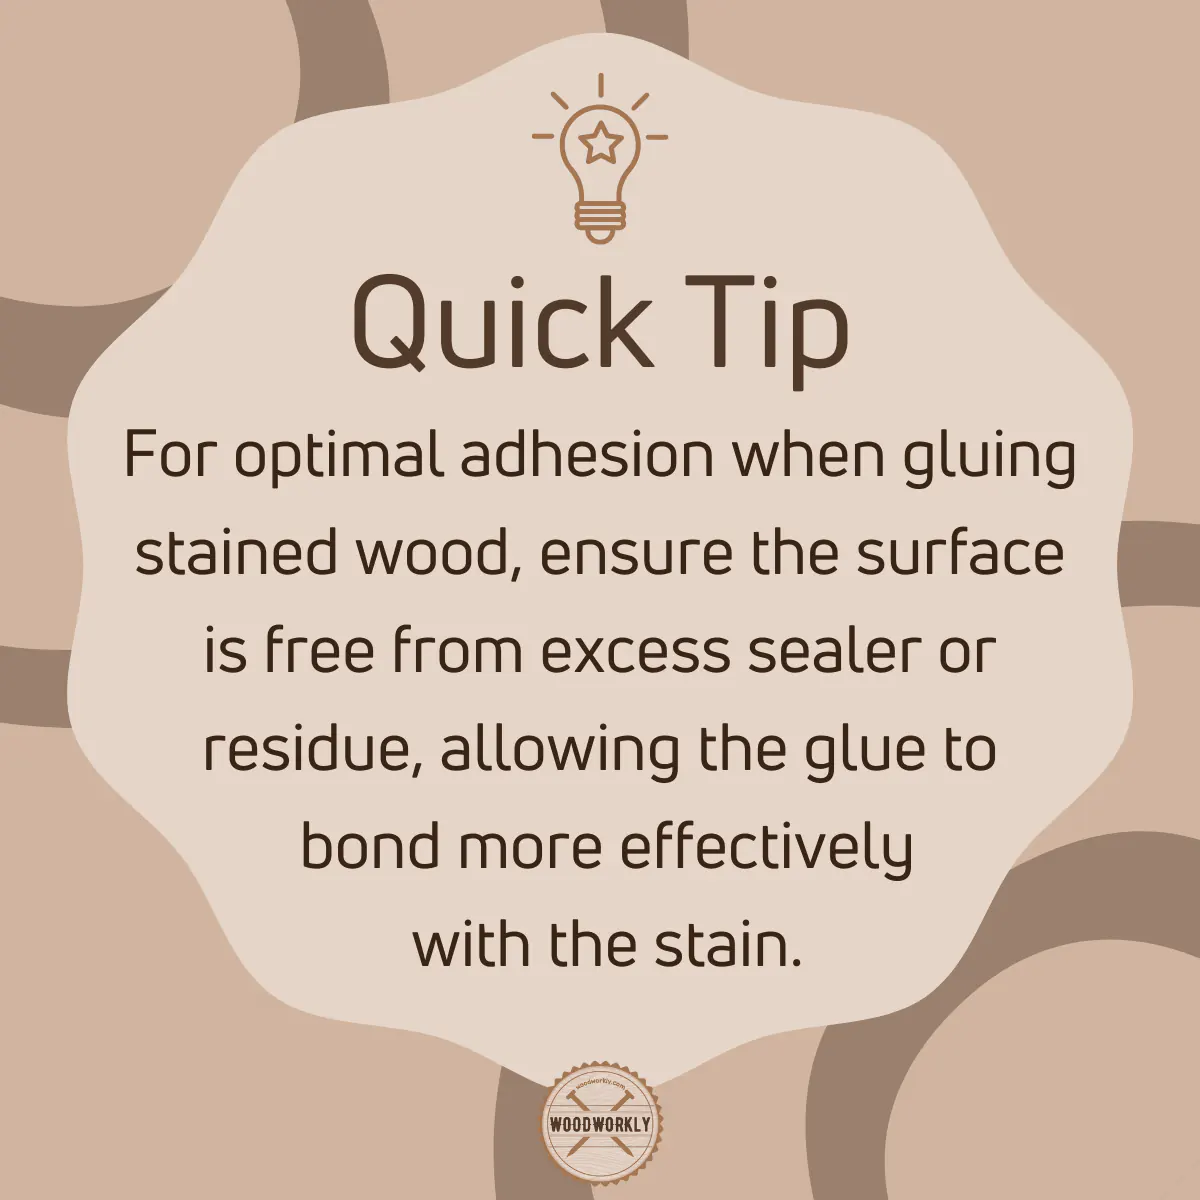 Tip for Gluing stained wood